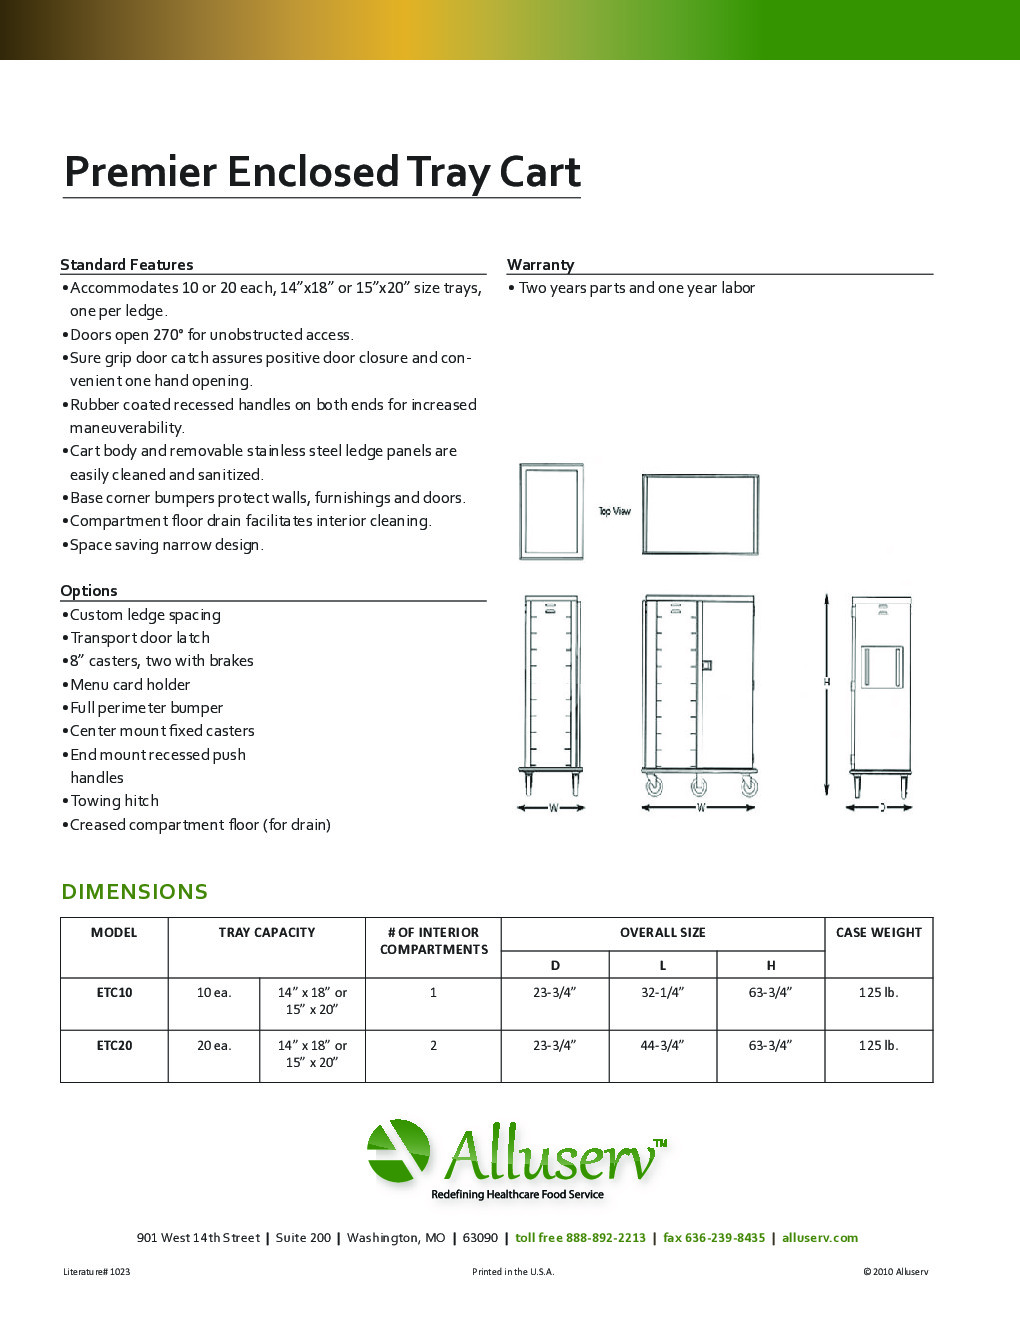 Alluserv ETC10 Meal Tray Delivery Cabinet